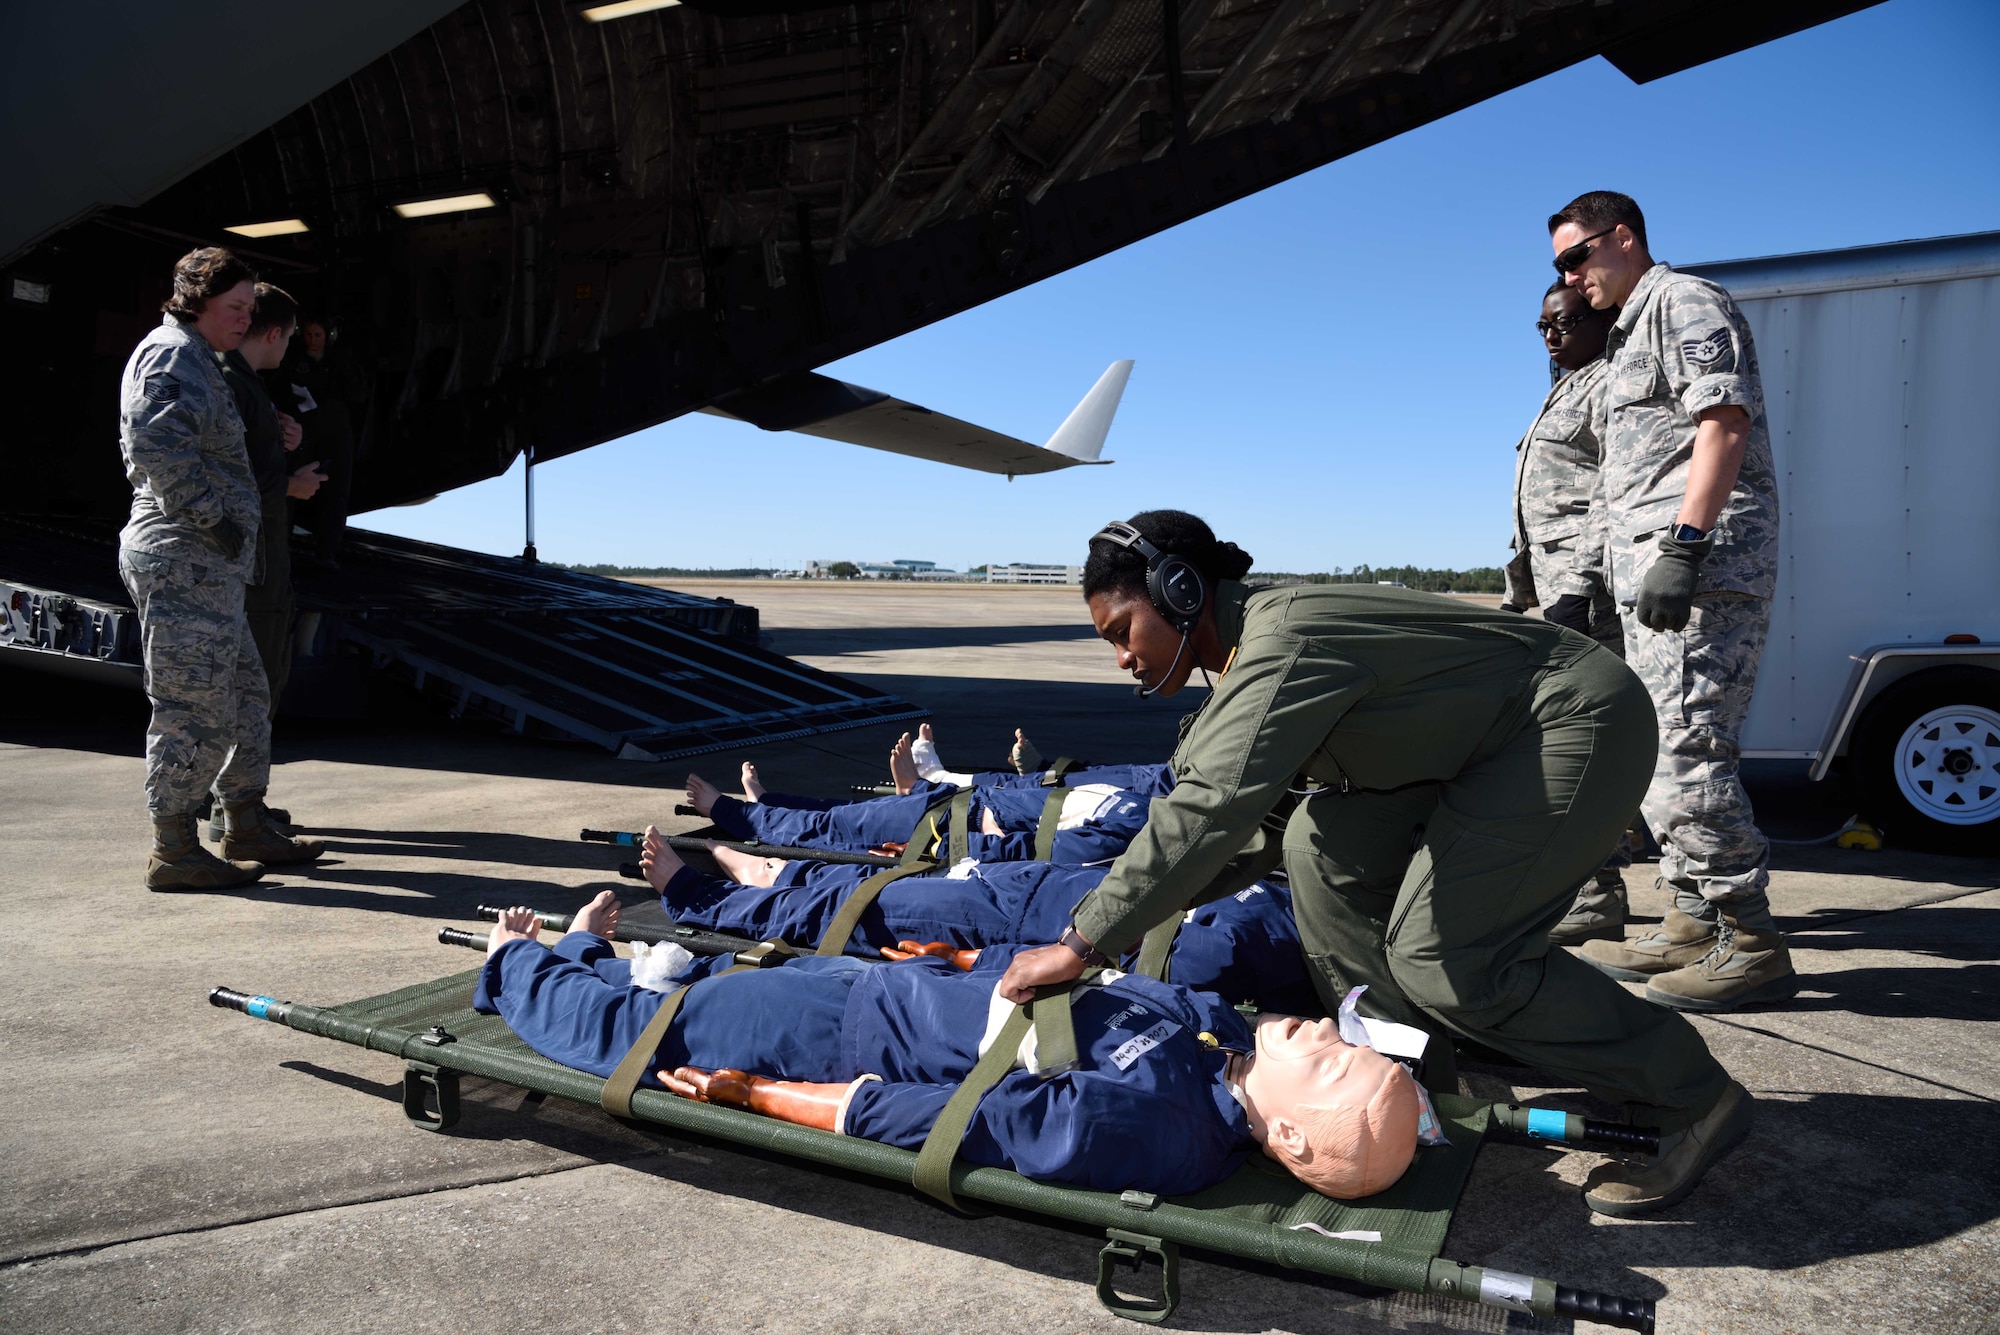 Master Sgt. Kimelyn Hall, 36th Aeromedical Evacuation Squadron aeromedical evacuation technician, ensures simulated patients are secured to their litters before being loaded onto a C-17 Globemaster III aircraft during Southern Strike 2018 at the Gulfport Combat Readiness Training Center, Mississippi, Oct. 30, 2017. Southern Strike 2018 is a large-scale, joint multinational combat exercise that provides tactical level training for the full spectrum of conflict and emphasizes air dominance, maritime operations, maritime air support, precision engagement, close air support, command and control, personnel recovery, aeromedical evacuation, and combat medical support. (U.S. Air Force photo by Tech. Sgt. Ryan Labadens)